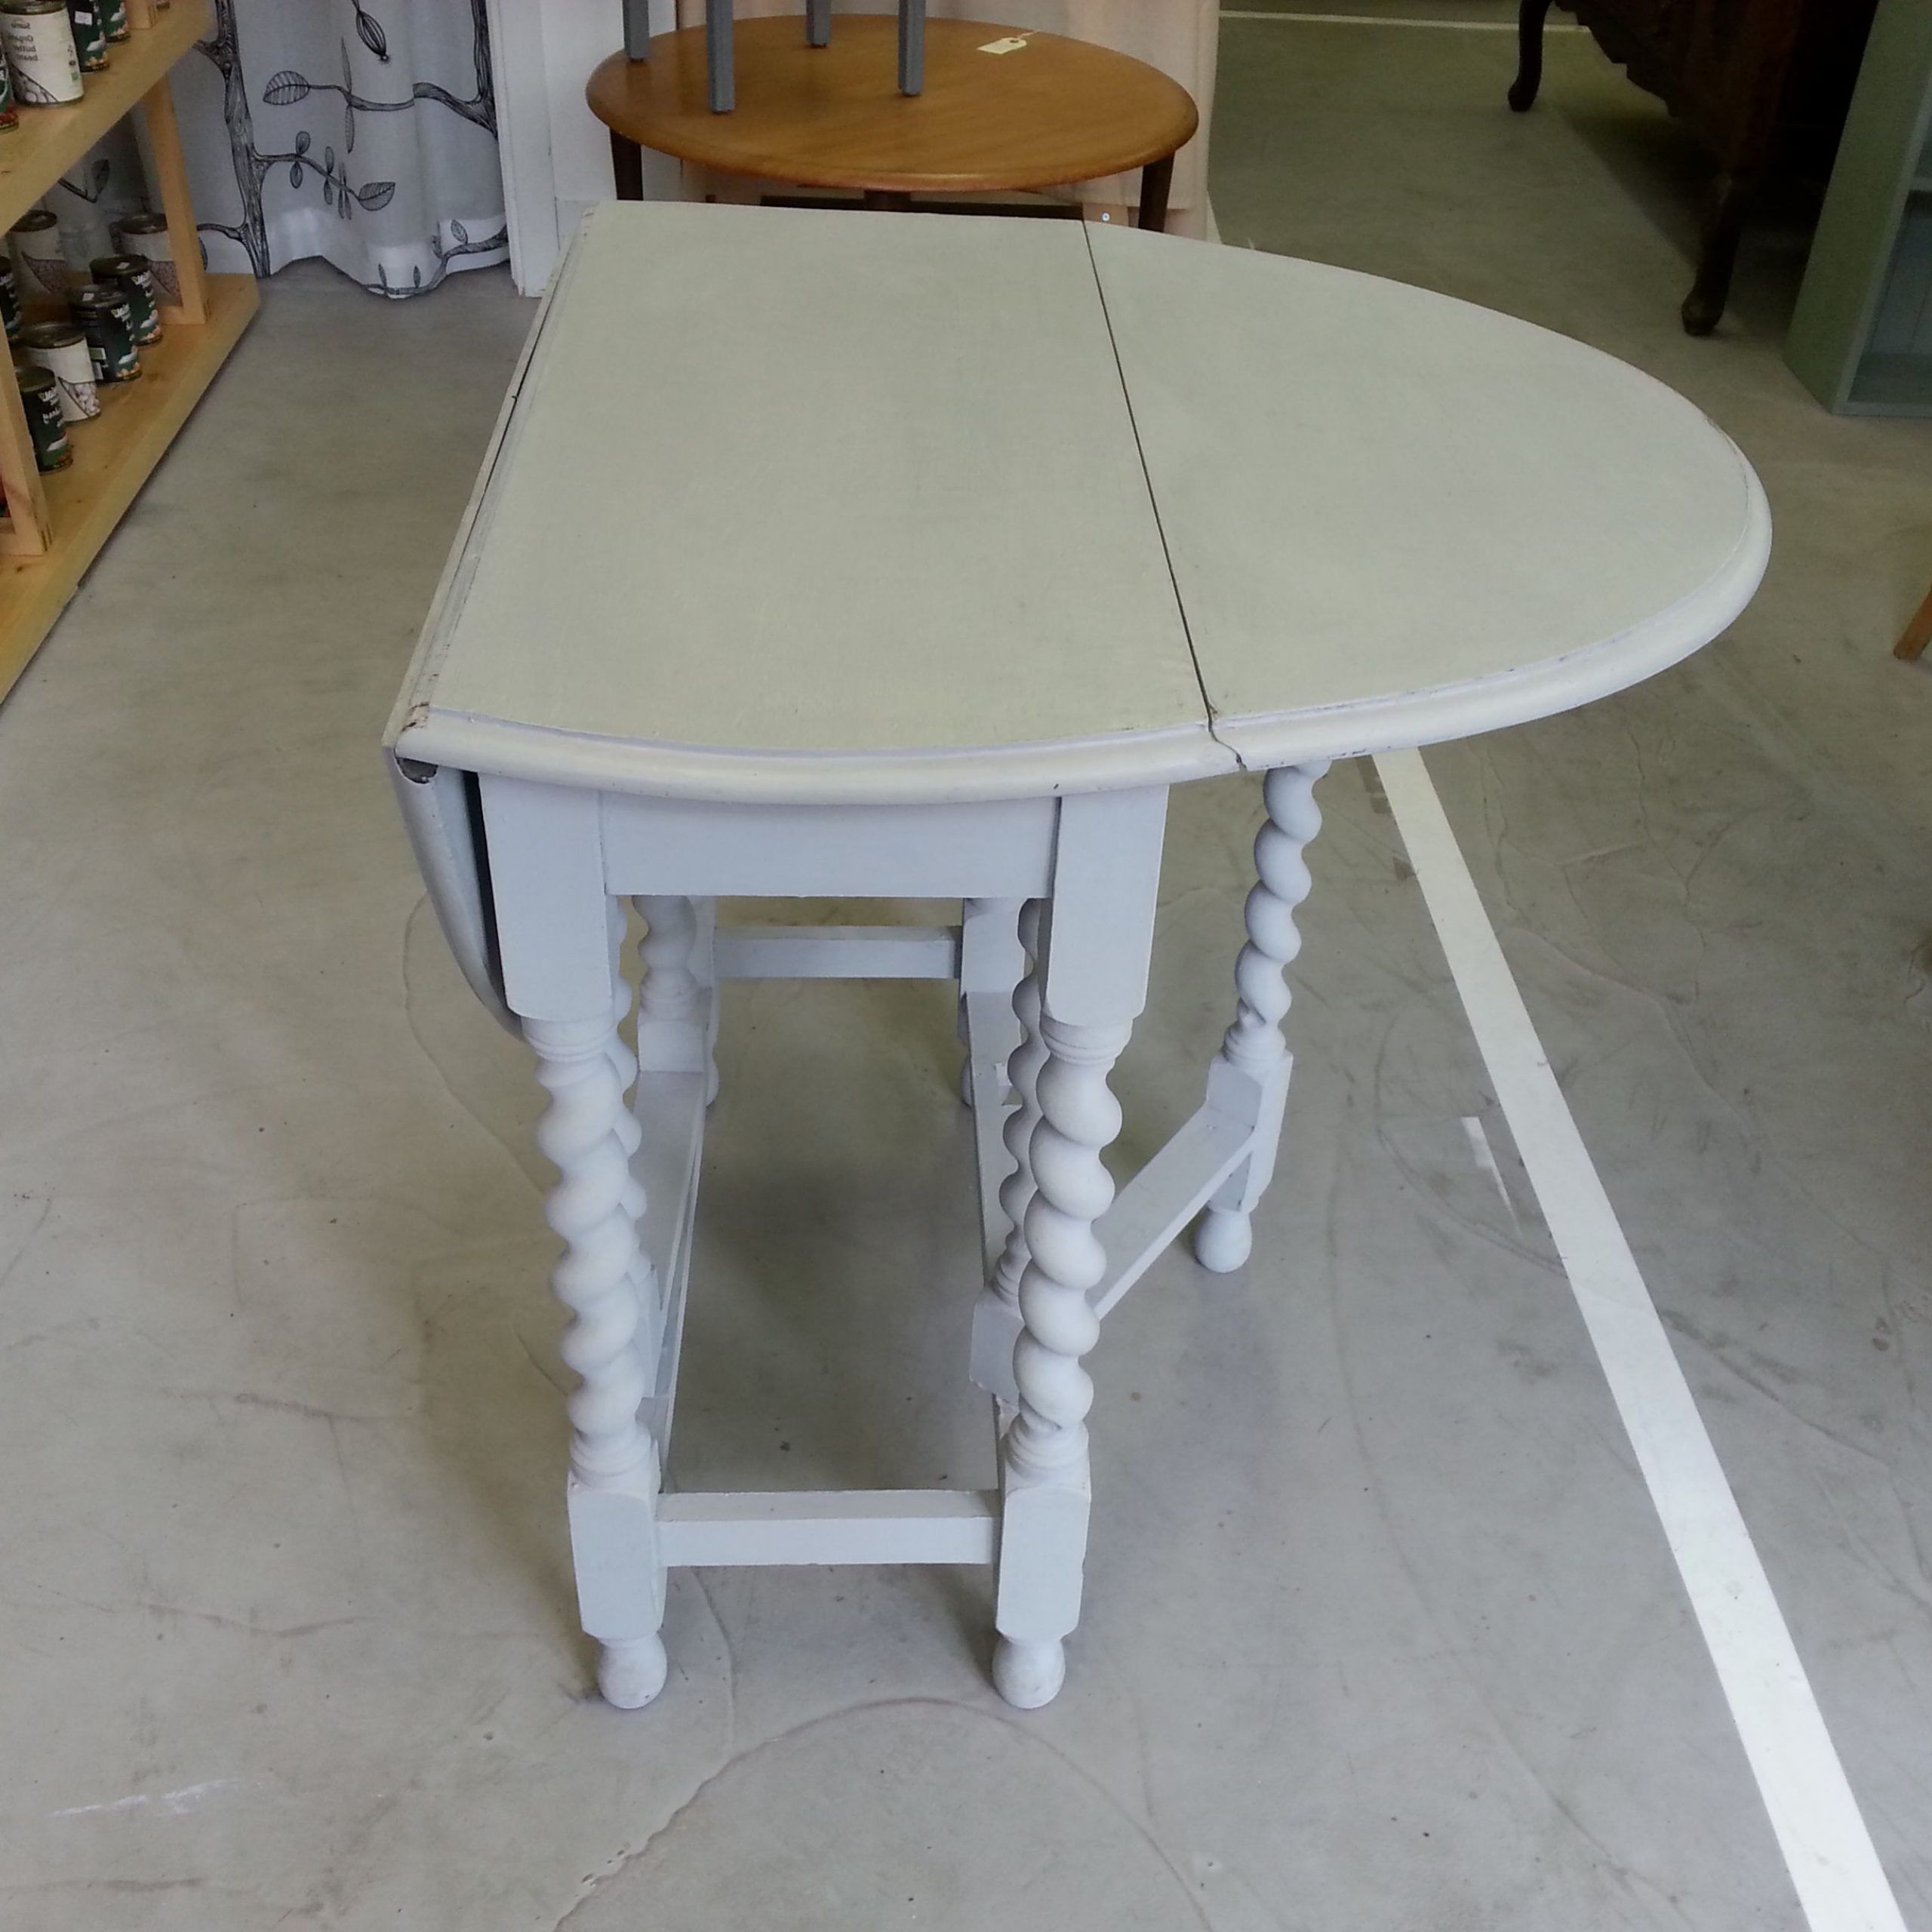 Gray Drop Leaf Console Dining Tables Throughout Well Known Small Drop Leaf Table With Barley Twist Legs In Paris Grey Chalkpaint (View 13 of 15)